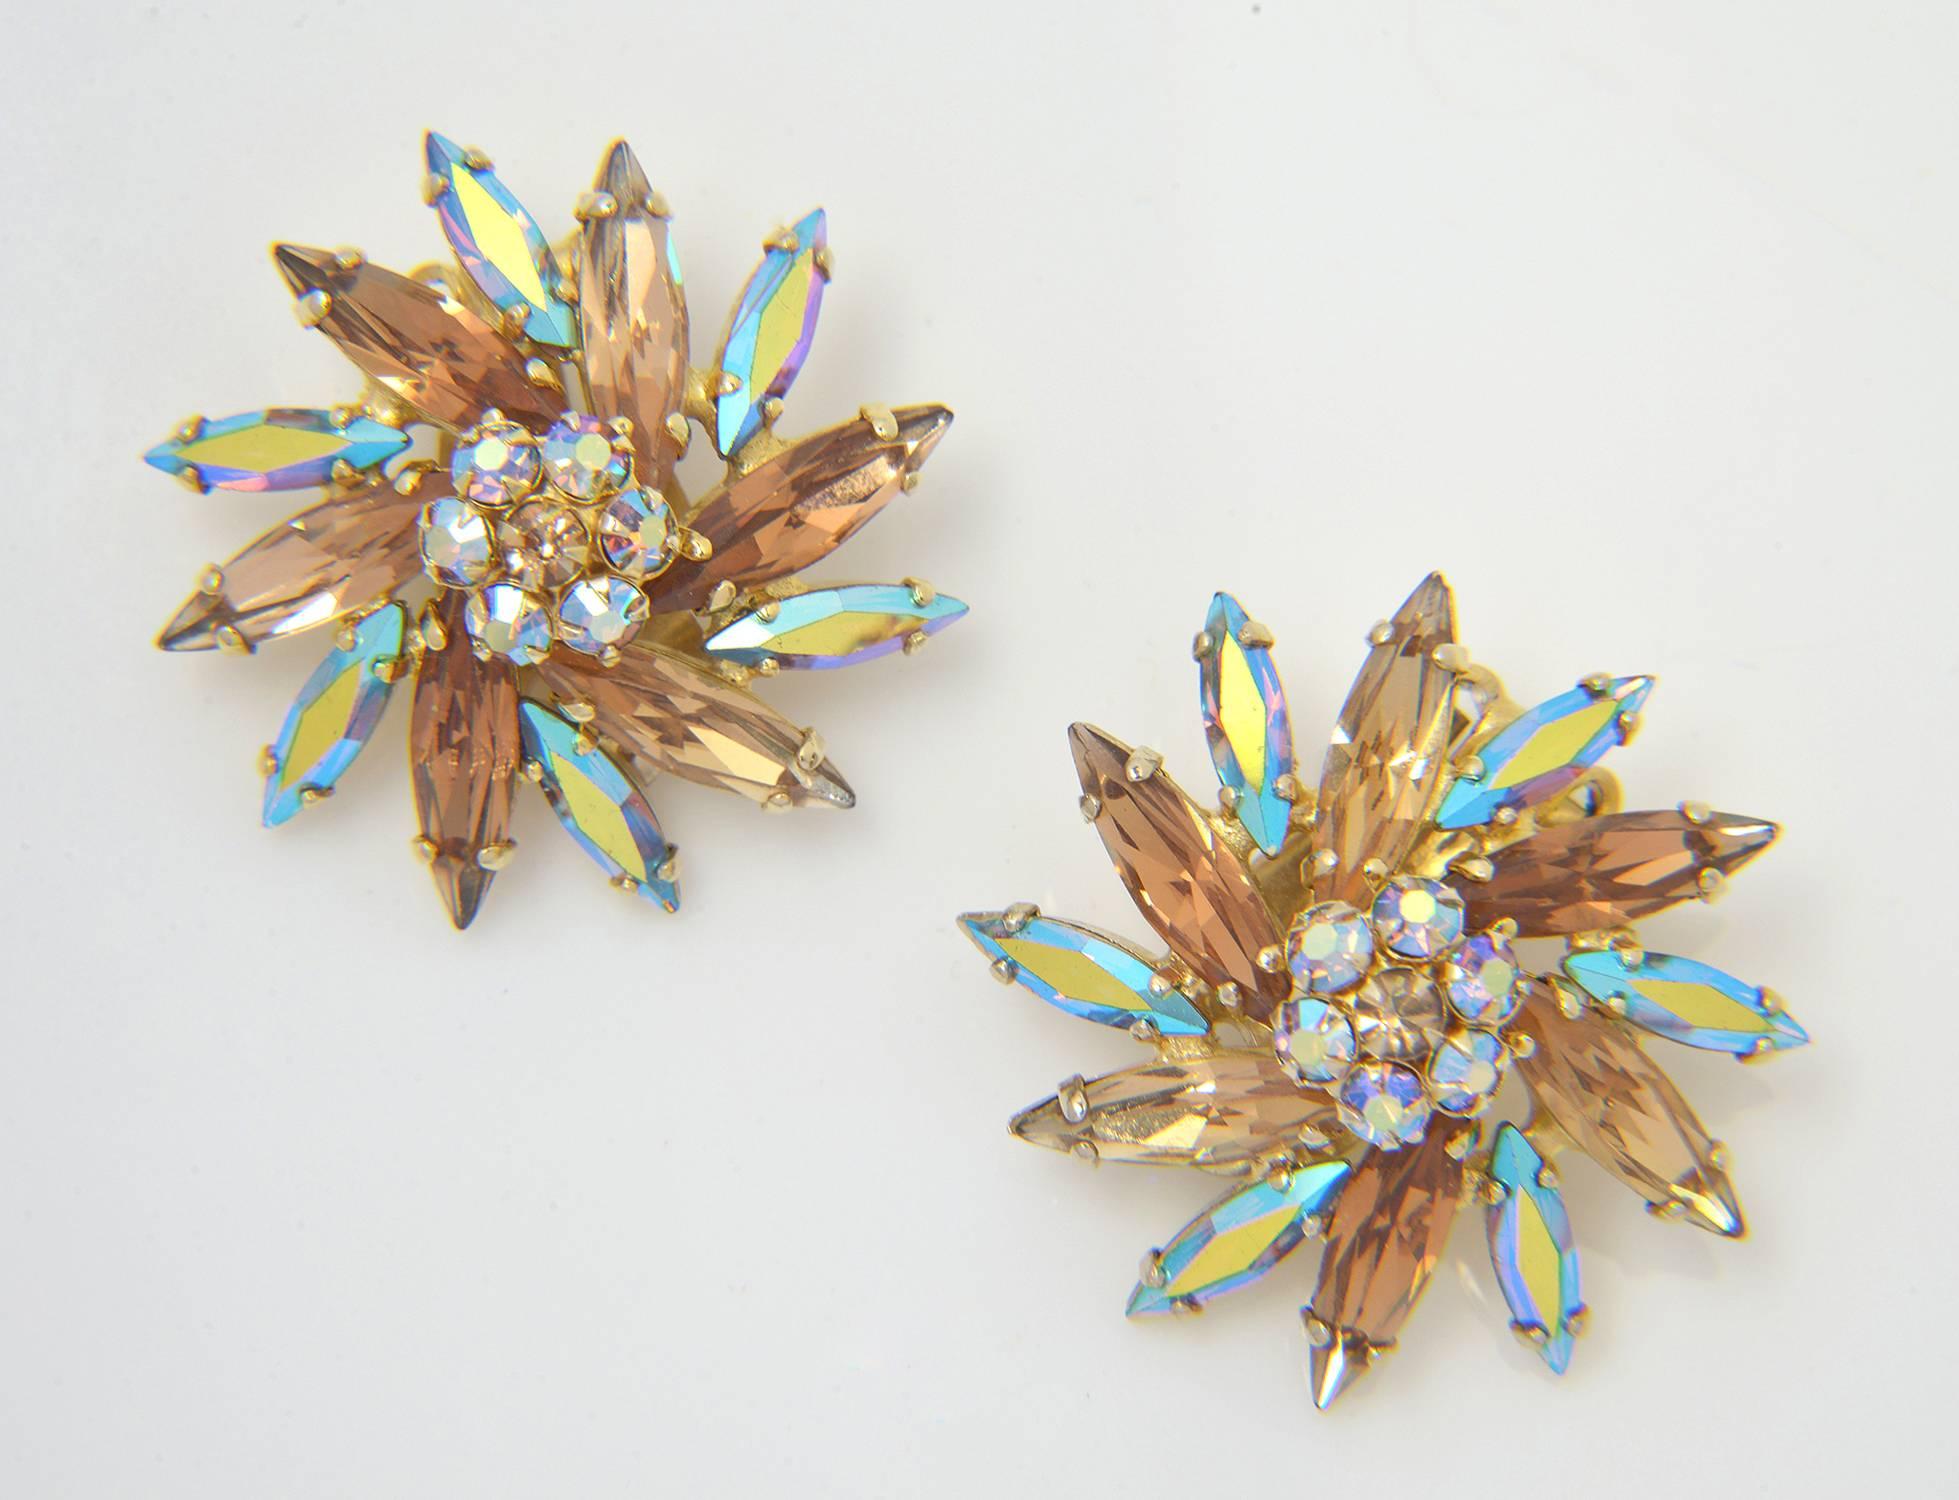 This 1950's signed by Sherman aurora borealis coated brooch comes with matching clip-on earrings. They are quite easy to have made into pierced earrings as well.  The set twinkles with lovely champagne and topaz hues.

Sherman, whose slogan was